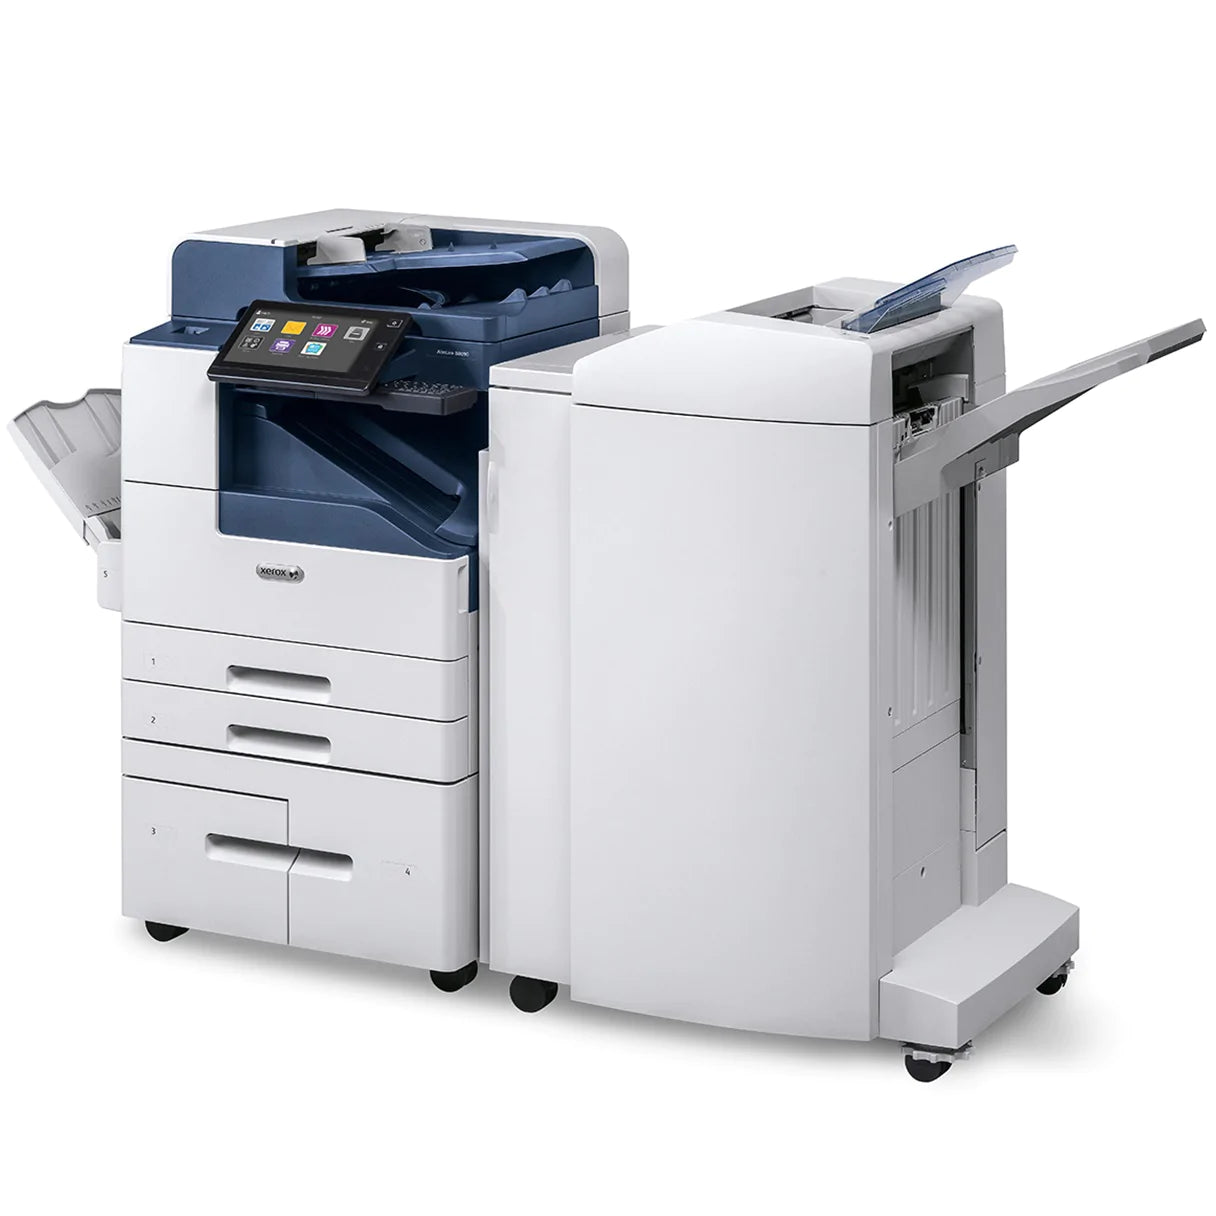 The Most Sophisticated Smart Multifunction Printer That